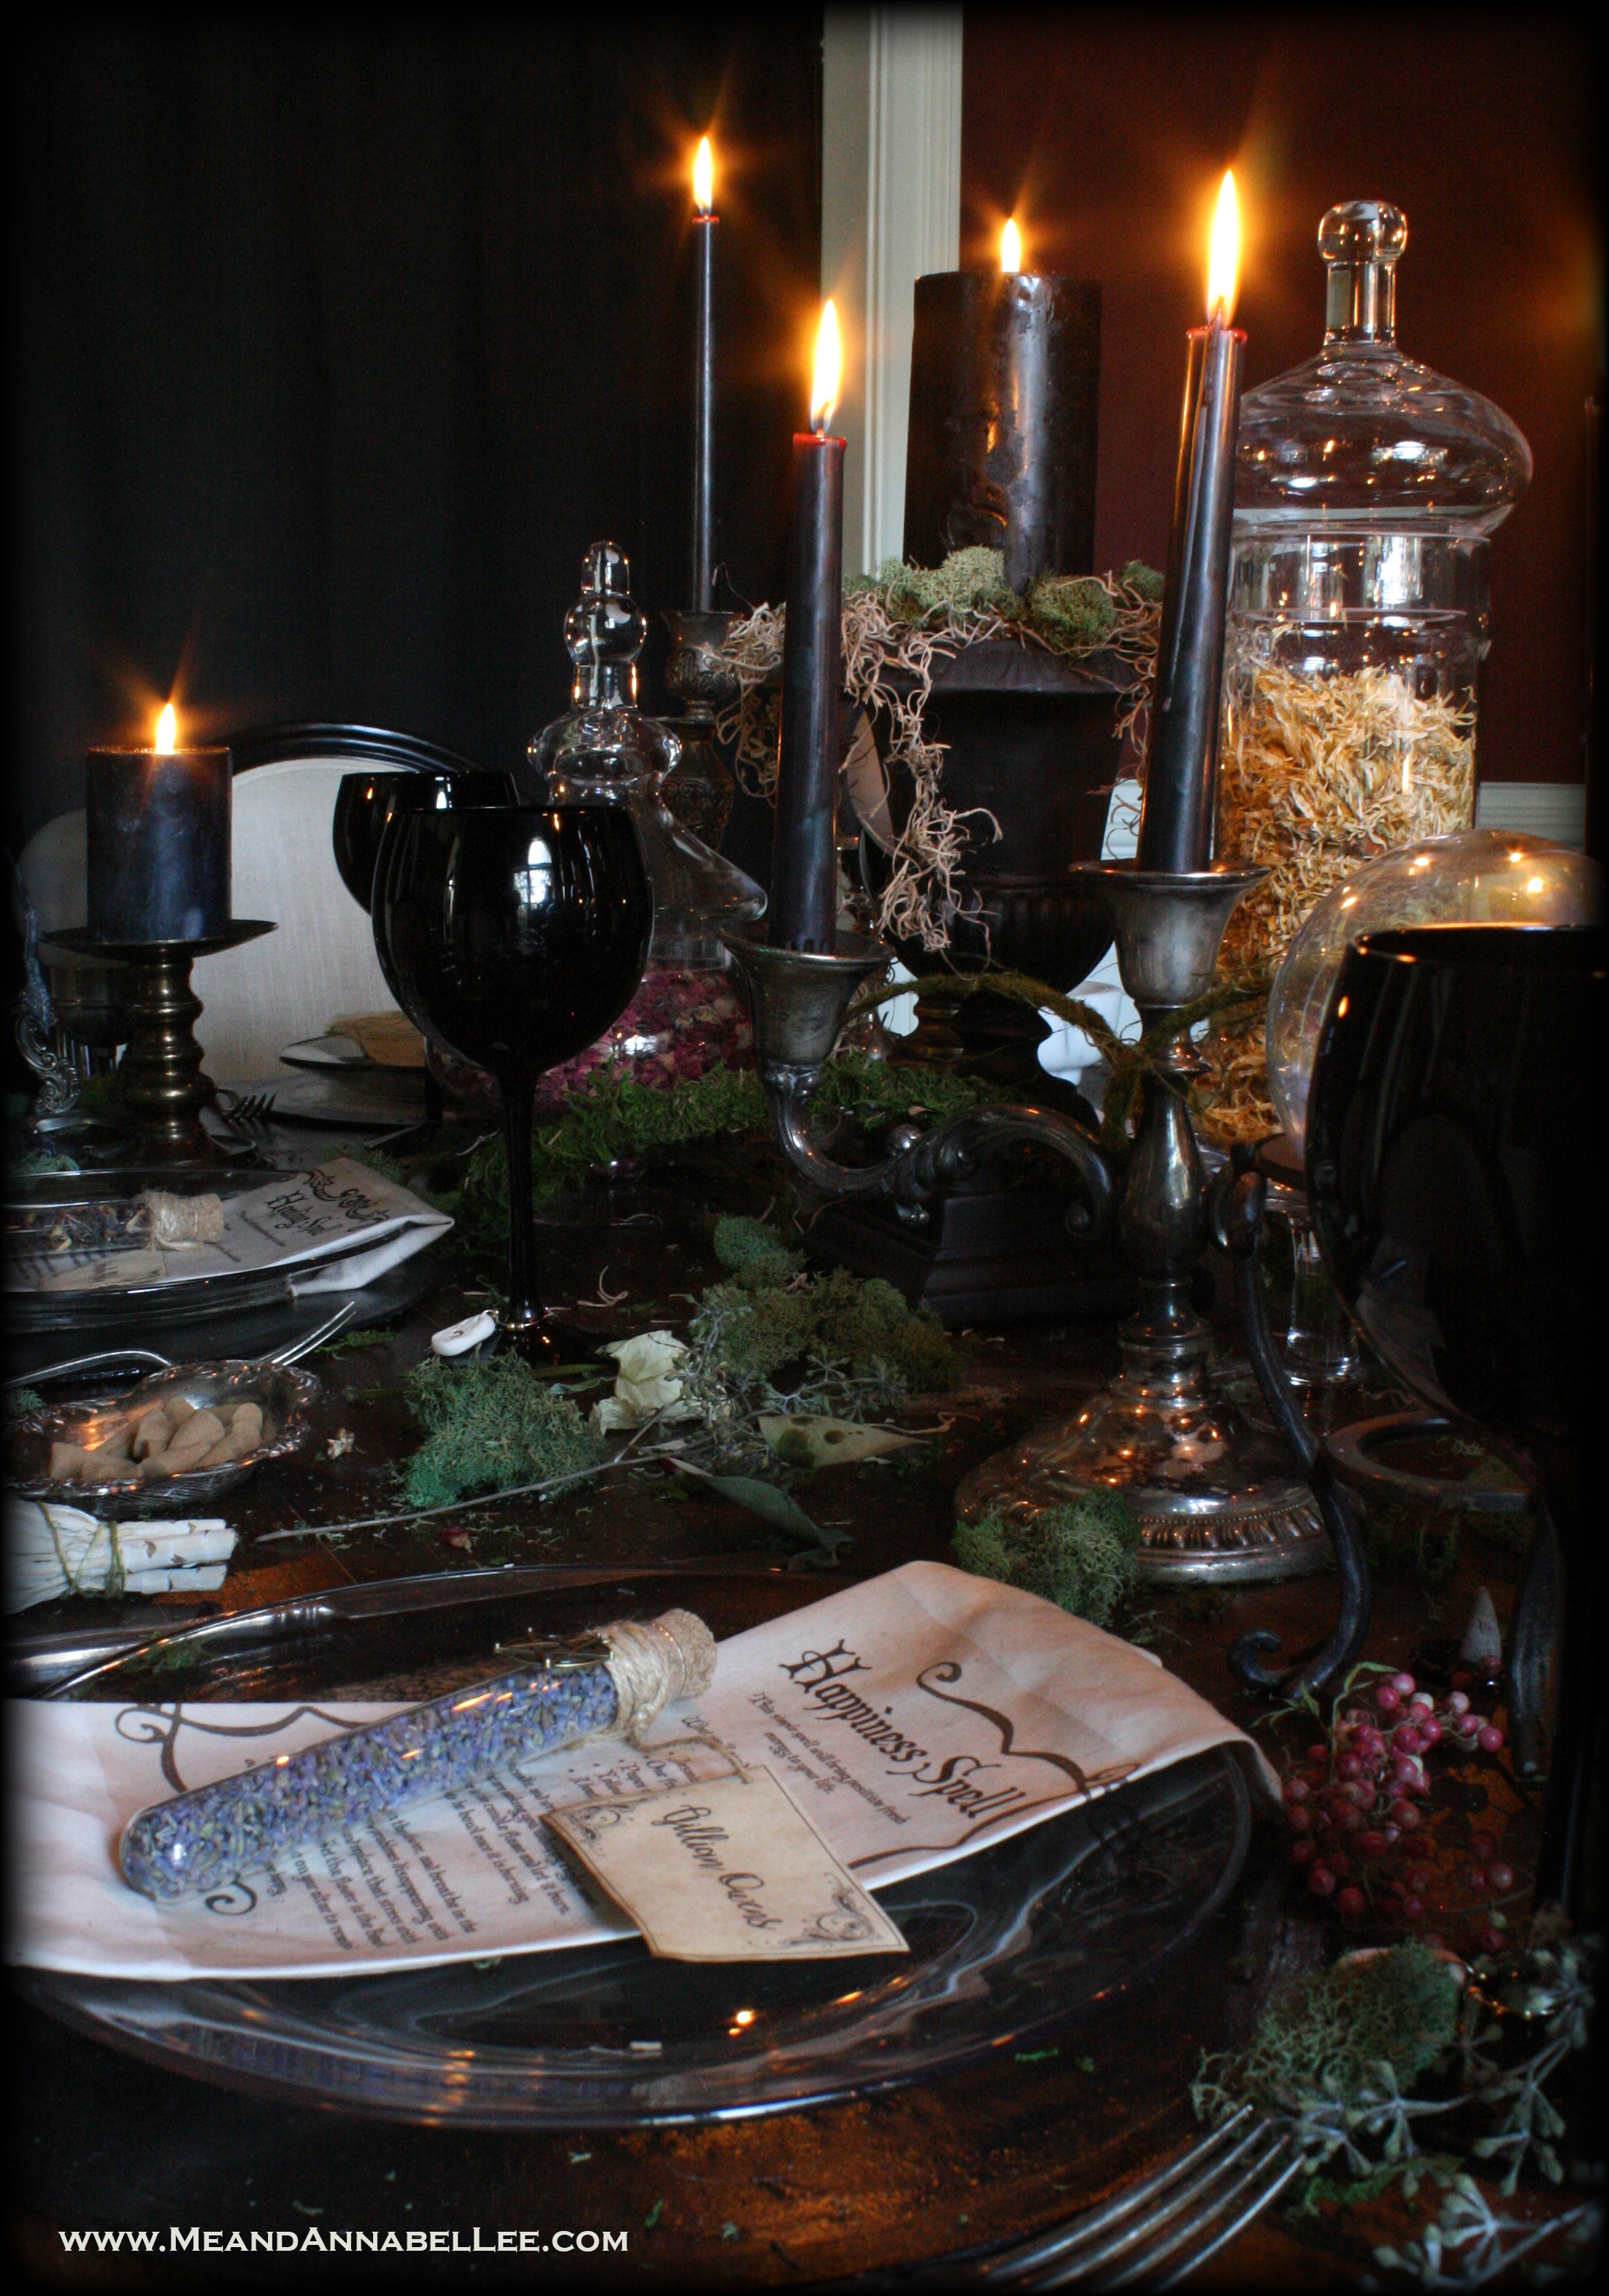 Witches Dinner Party | Tarnished Silver Candelabra | Mixed Metals | Black Candles | Antiques | Apothecary Jars | Spellbinding Place Setting | Natural Witch | Elegant Gothic Halloween | Dark & Moody Ambience | www.MeandAnnabelLee.com